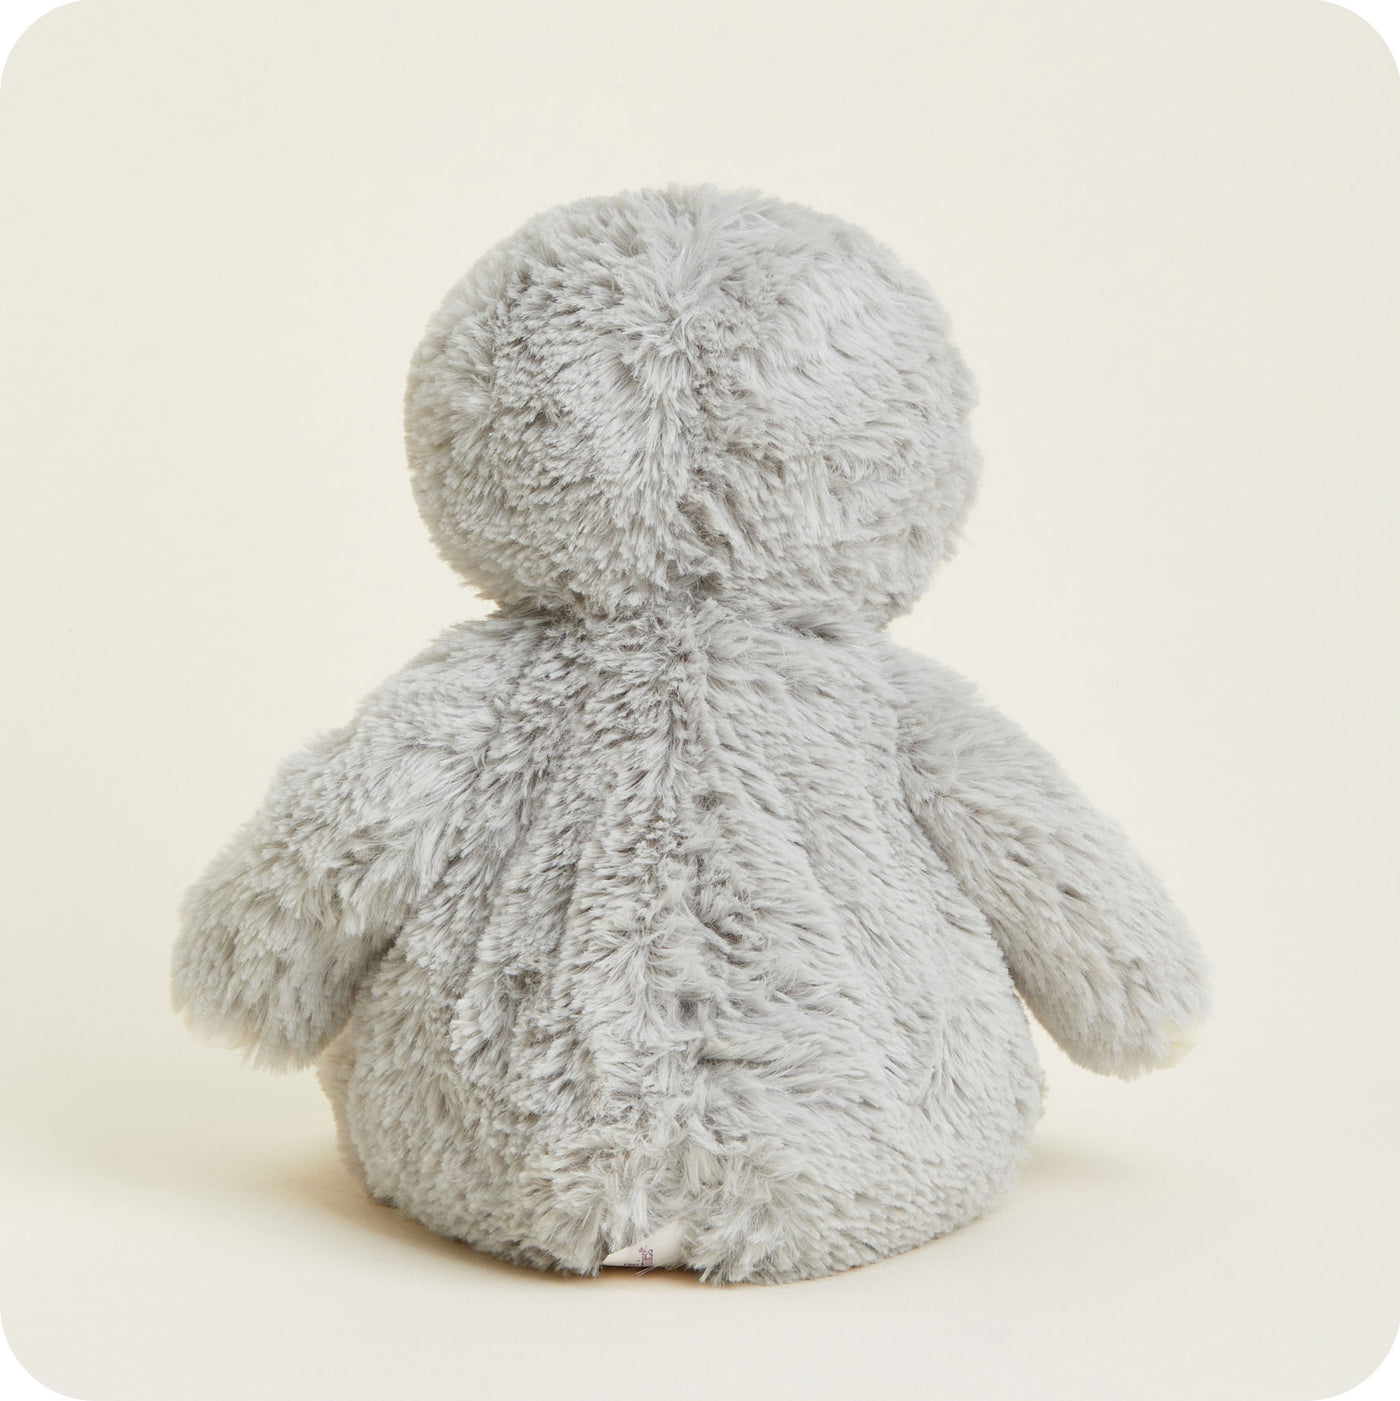 Soft Warm Weighted Gray Sloth Plush Warmies